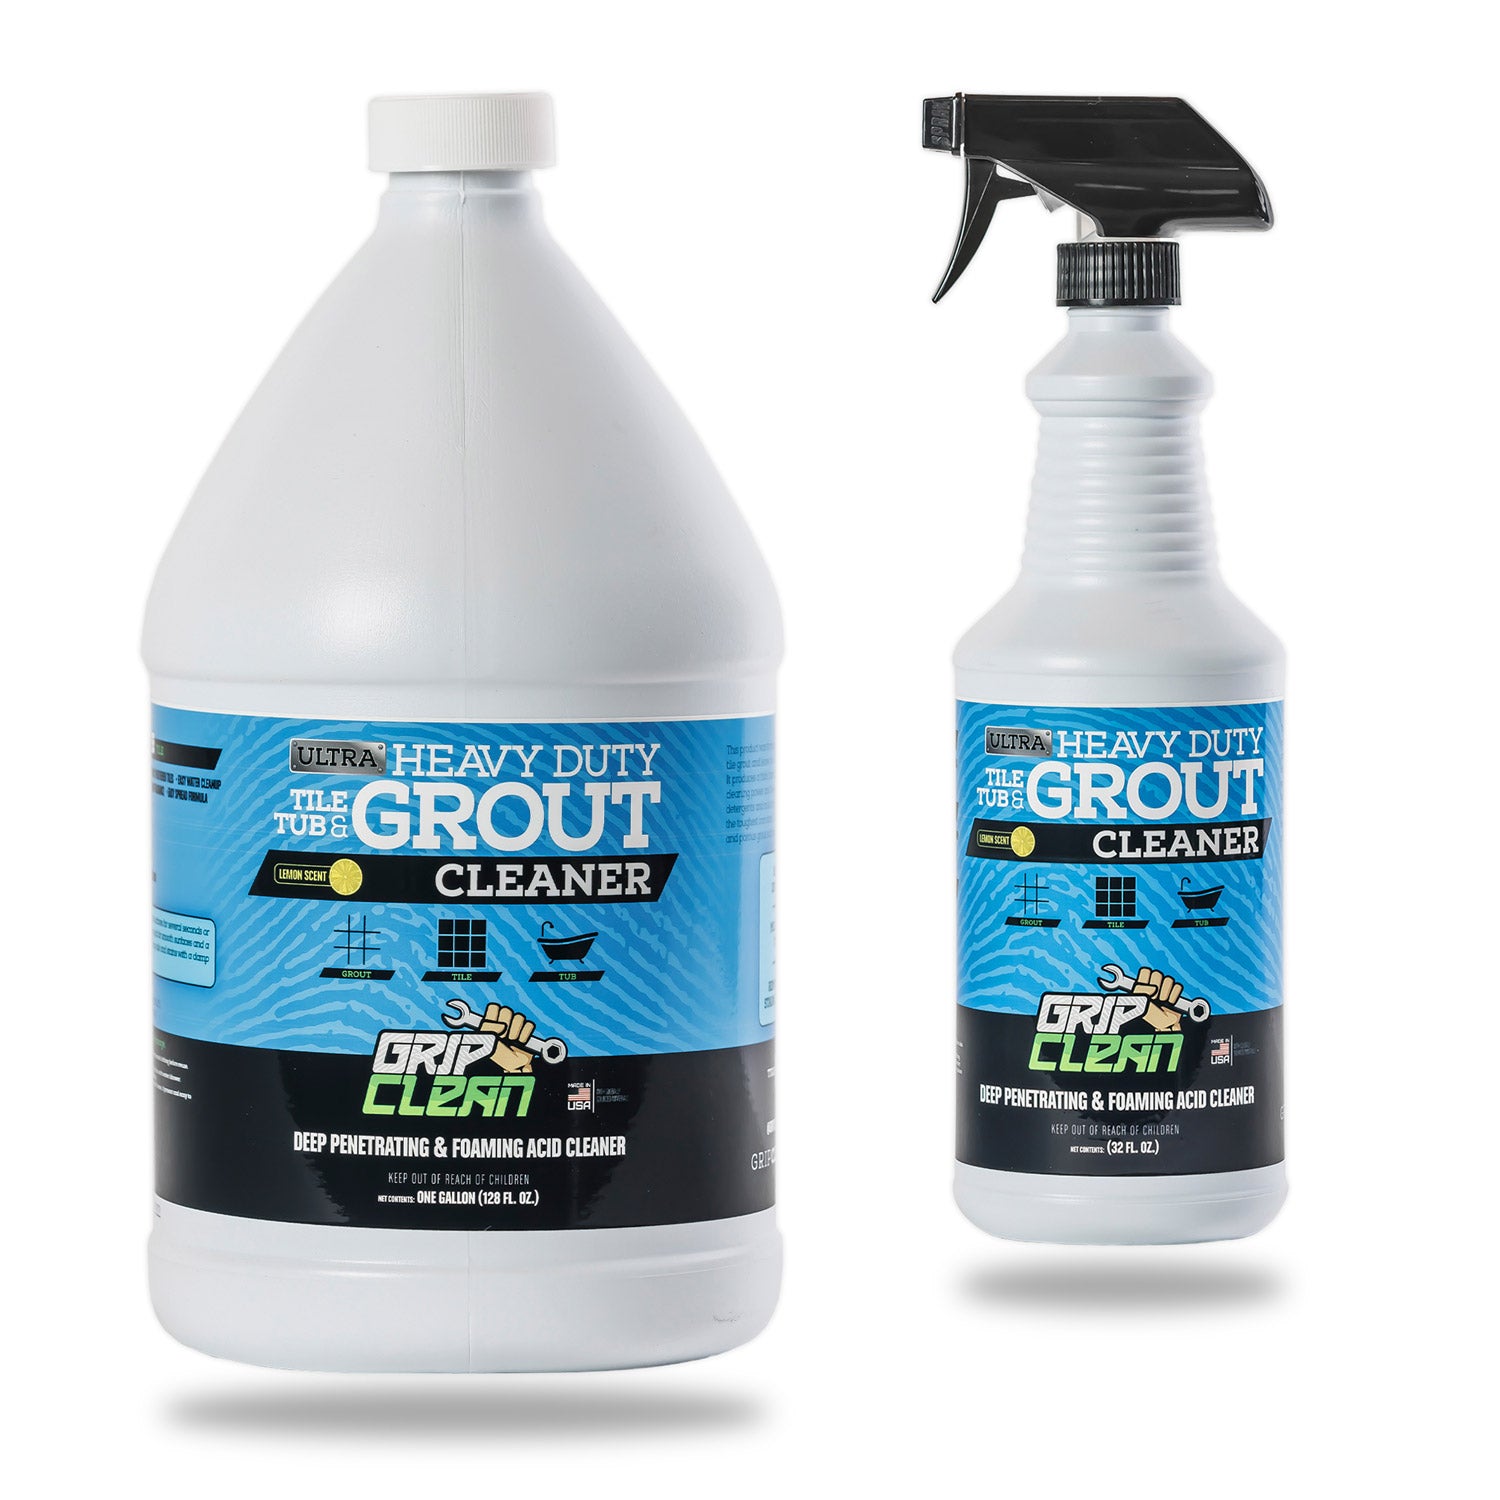 Tile & Grout Cleaner Gallon